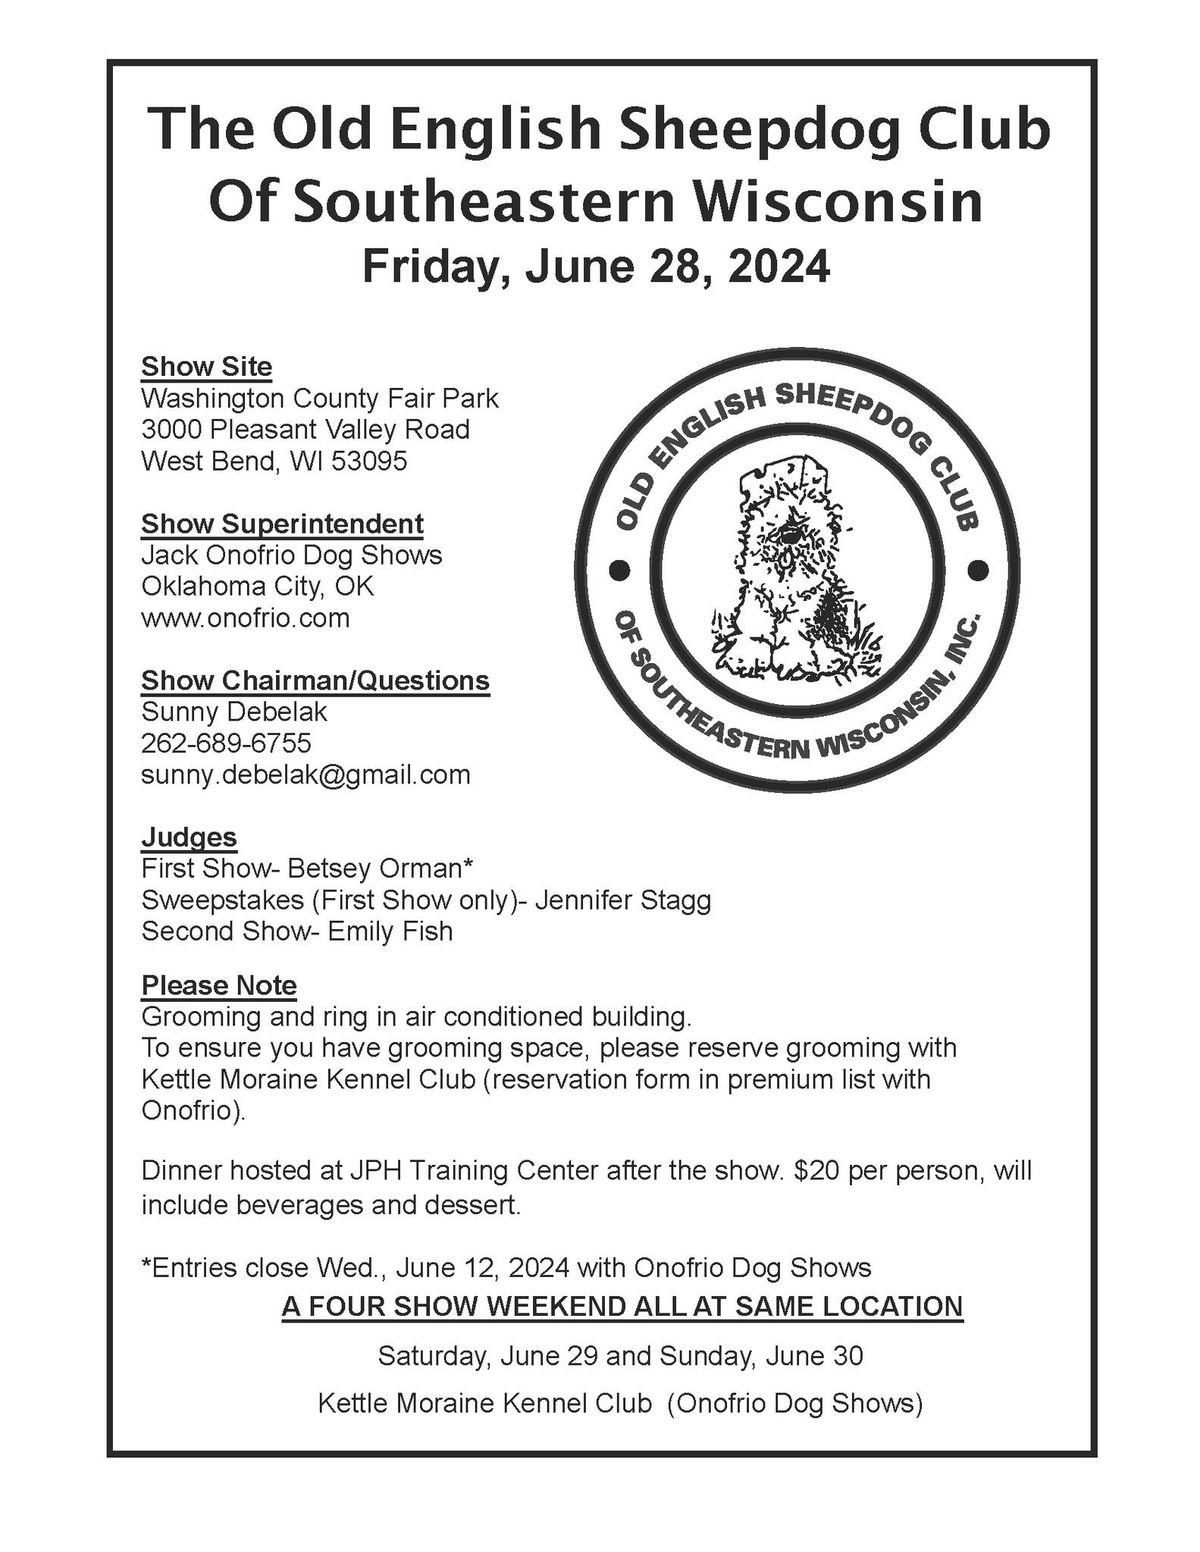 Old English Sheepdog Club of Southeast Wisconsin - Specialties